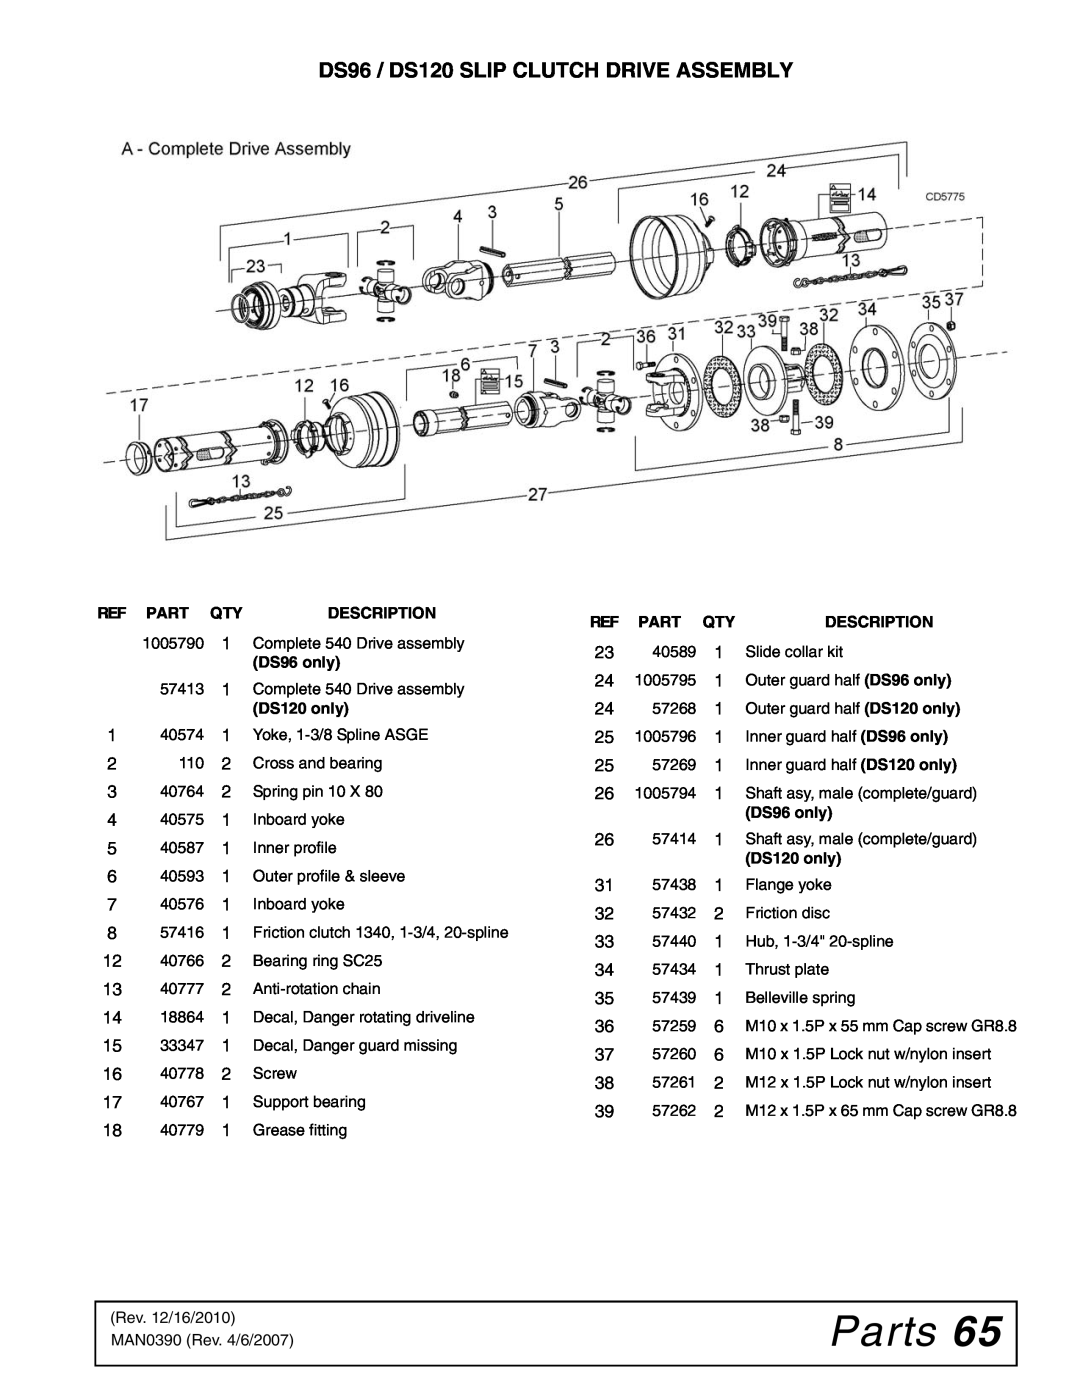 Woods Equipment manual Parts, DS96 / DS120 SLIP CLUTCH DRIVE ASSEMBLY, Description, DS96 only, DS120 only 